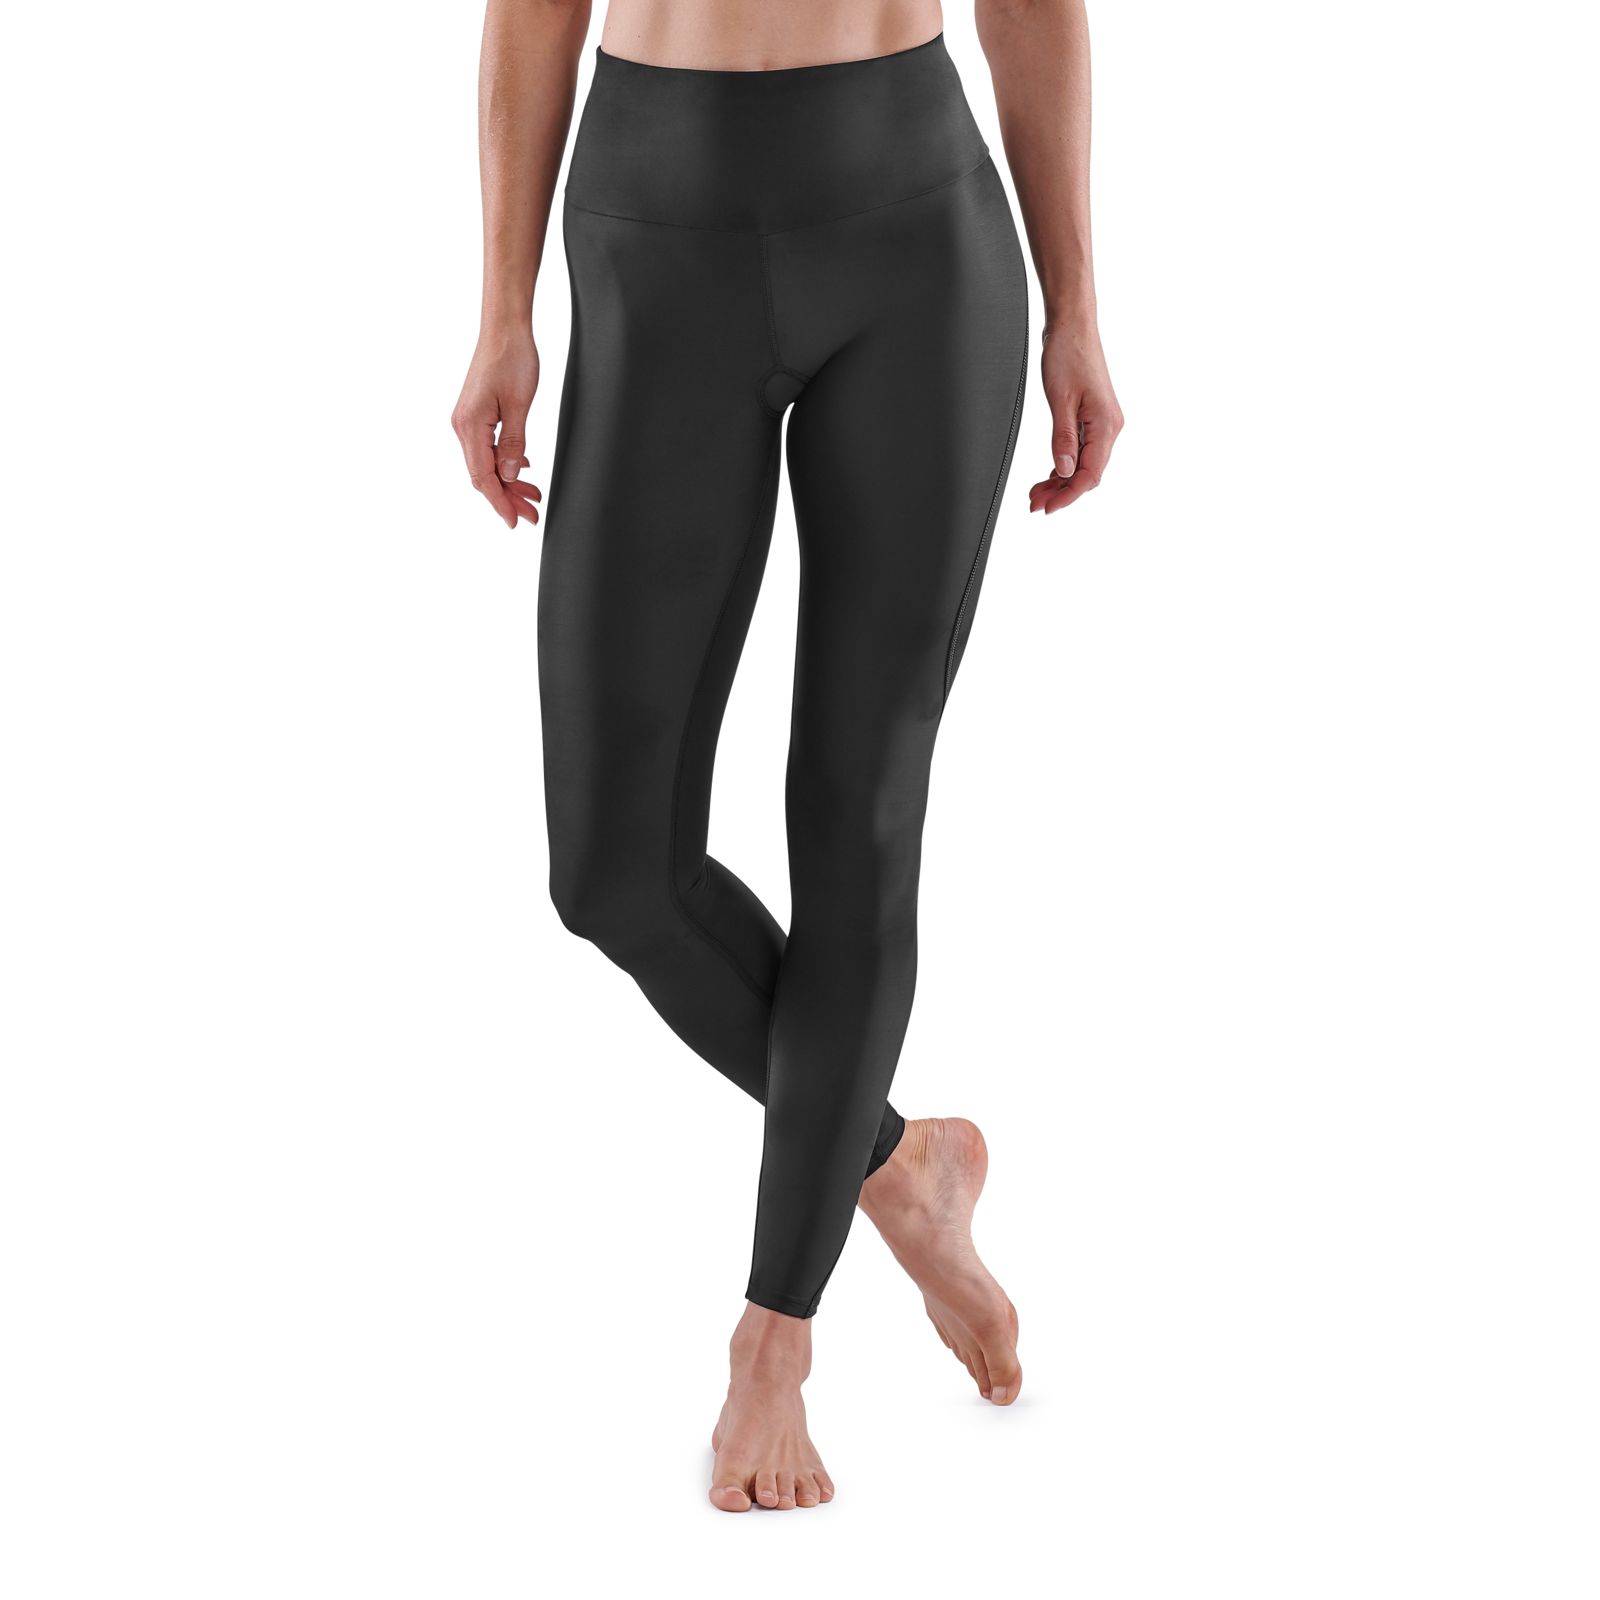 AUTHENTIC SKINS A400 WOMEN COMPRESSION TIGHTS SET SHORT SLEEVE TOP and  BOTTOM SPORTS PANTS - BLACK